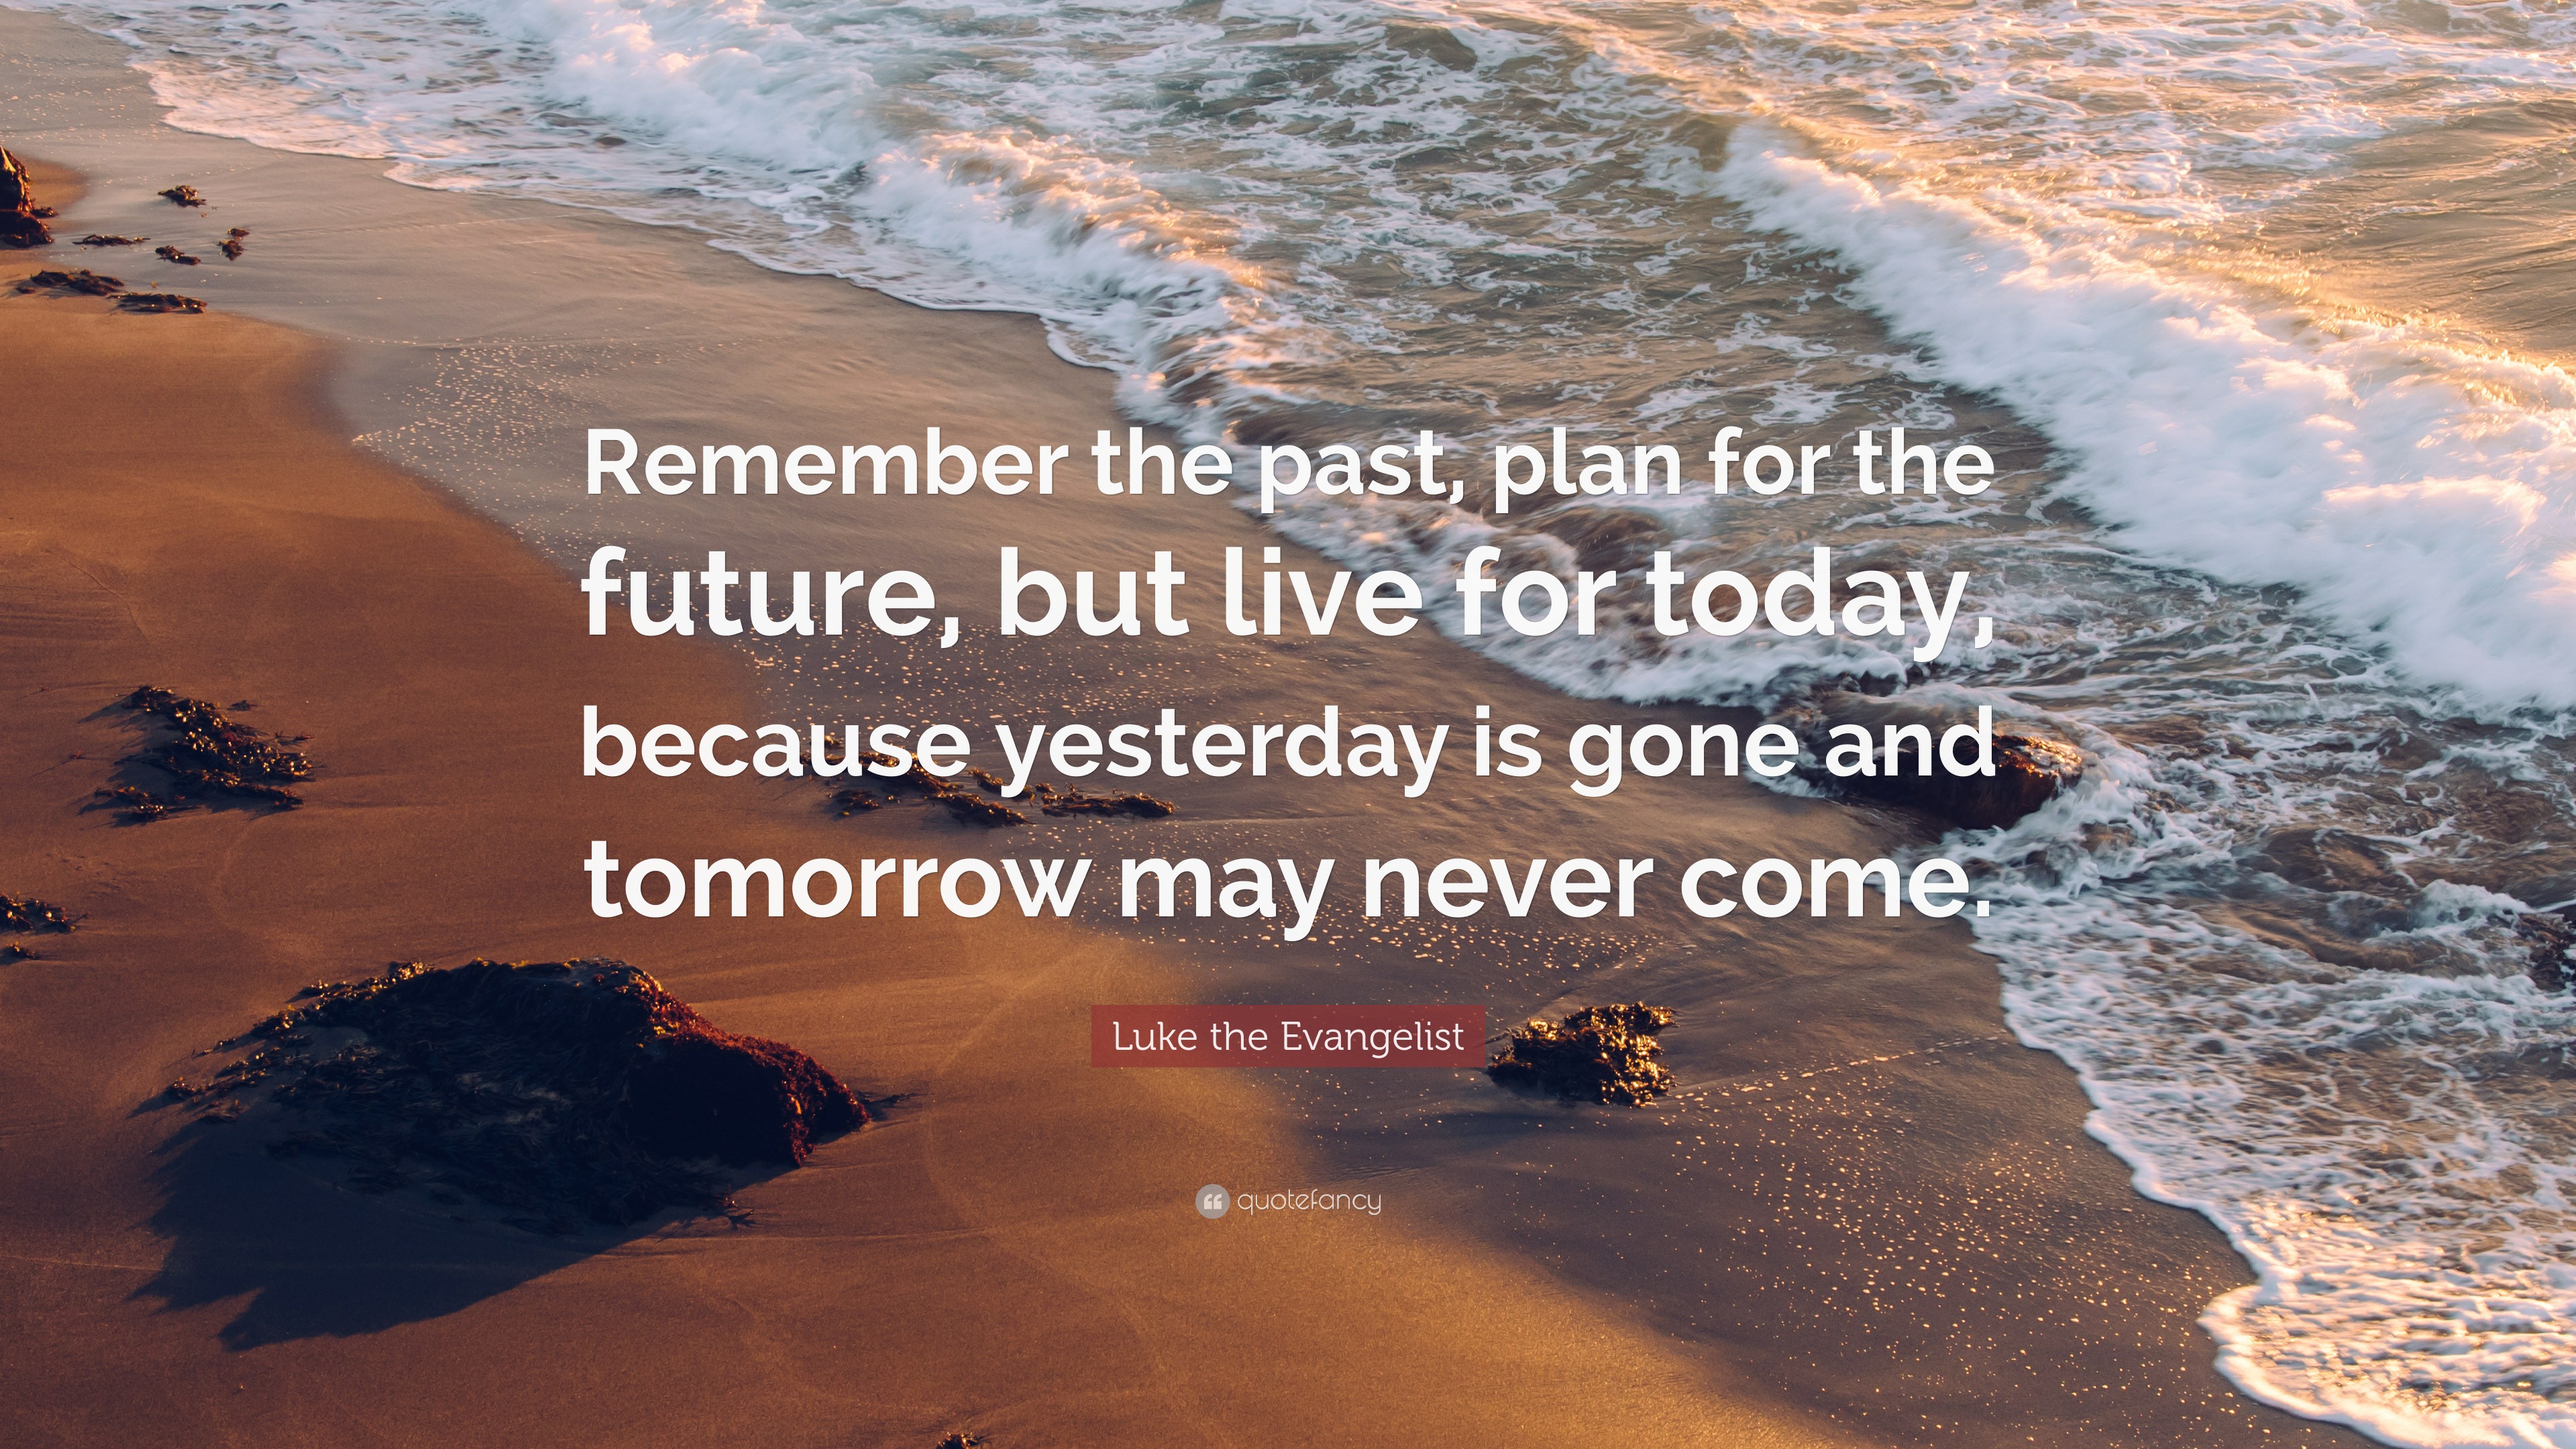 Luke the Evangelist Quote “Remember the past, plan for